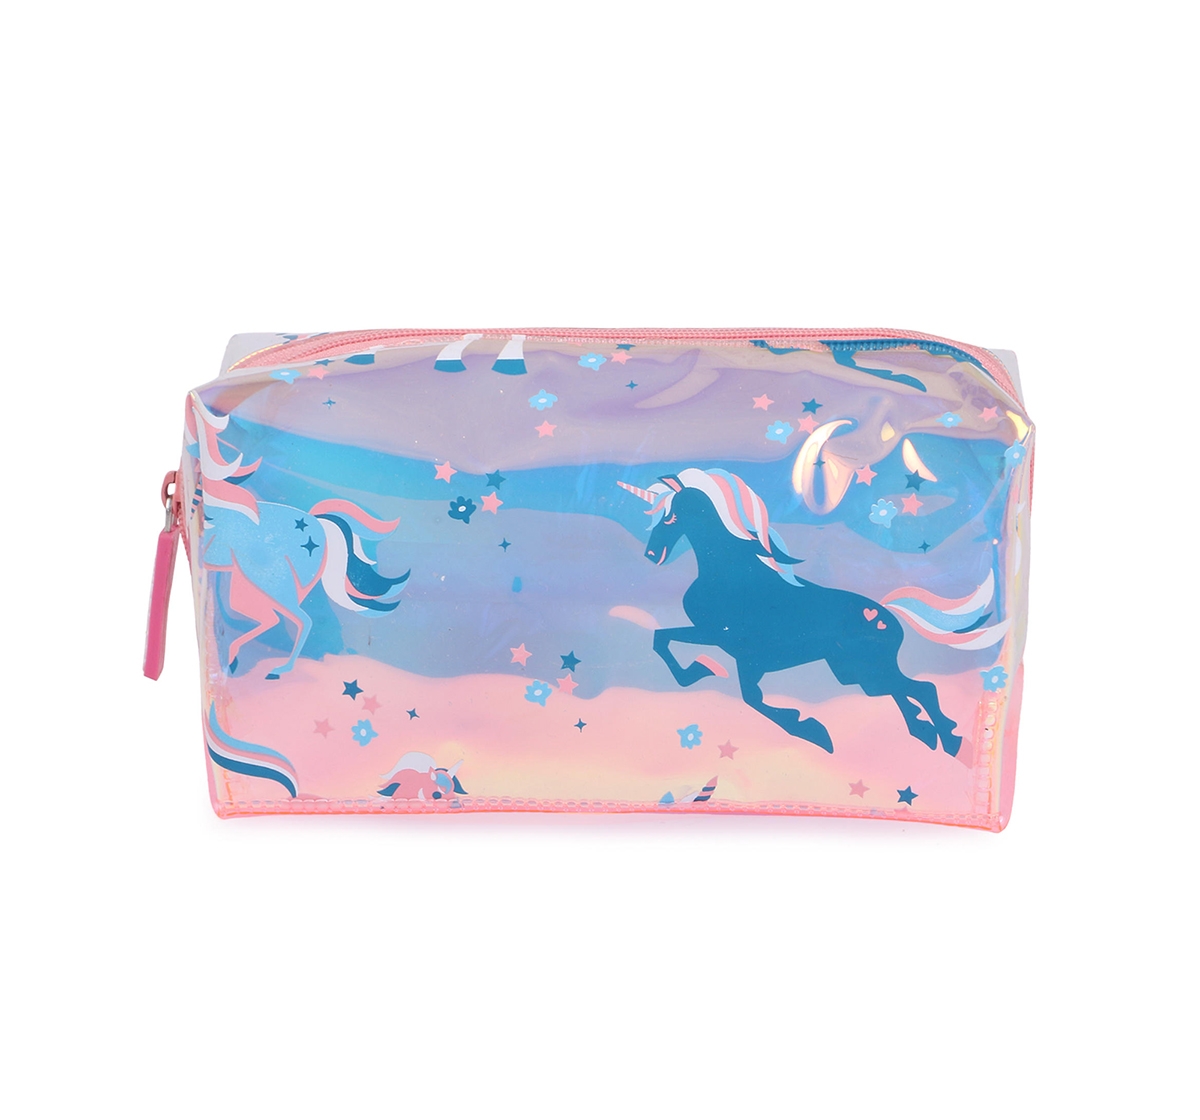 Hamster London | Hamster London Rectanglar Unicorn Pouch for Girls age 3Y+ (Pink) 0